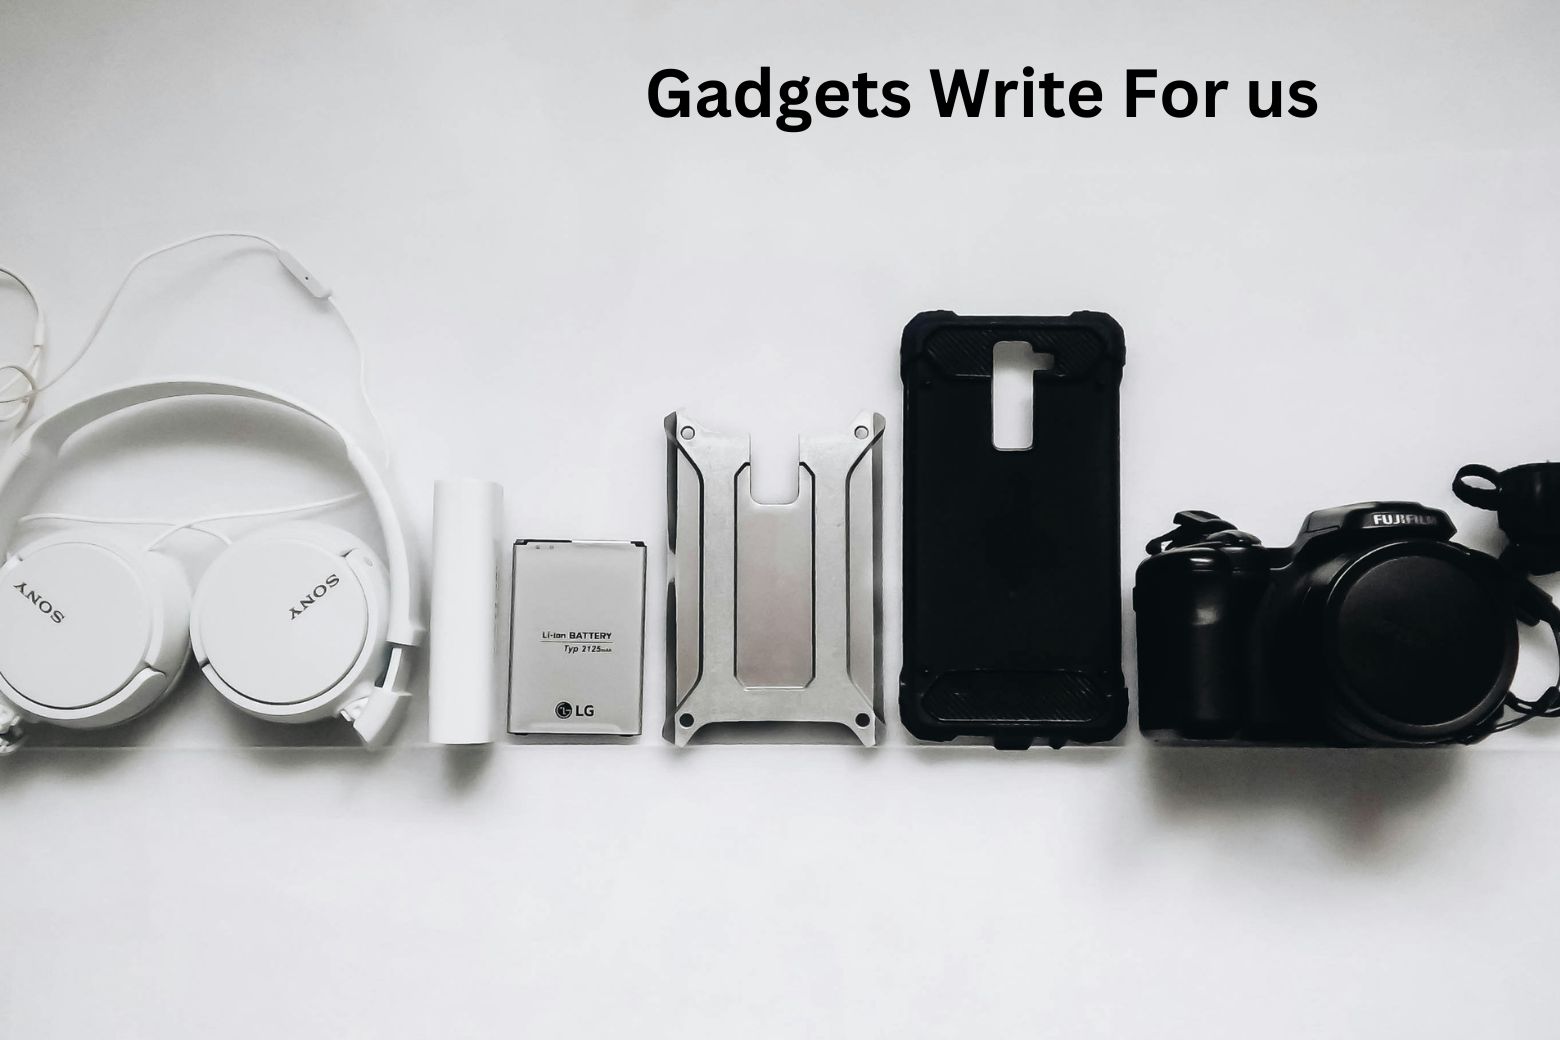 Gadgets Write For us